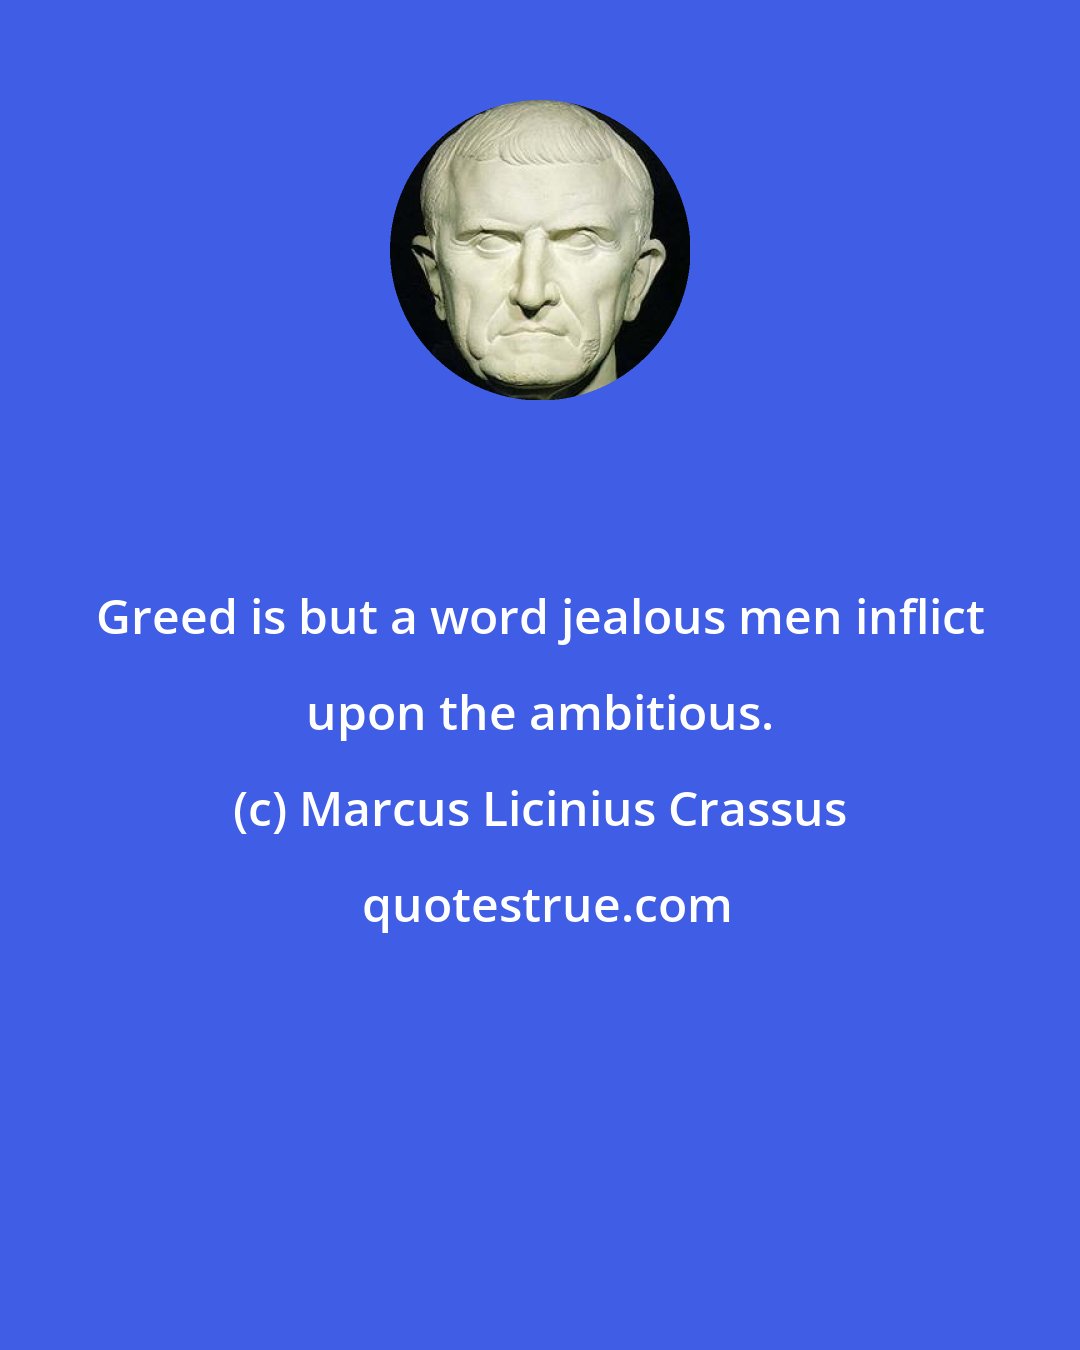 Marcus Licinius Crassus: Greed is but a word jealous men inflict upon the ambitious.